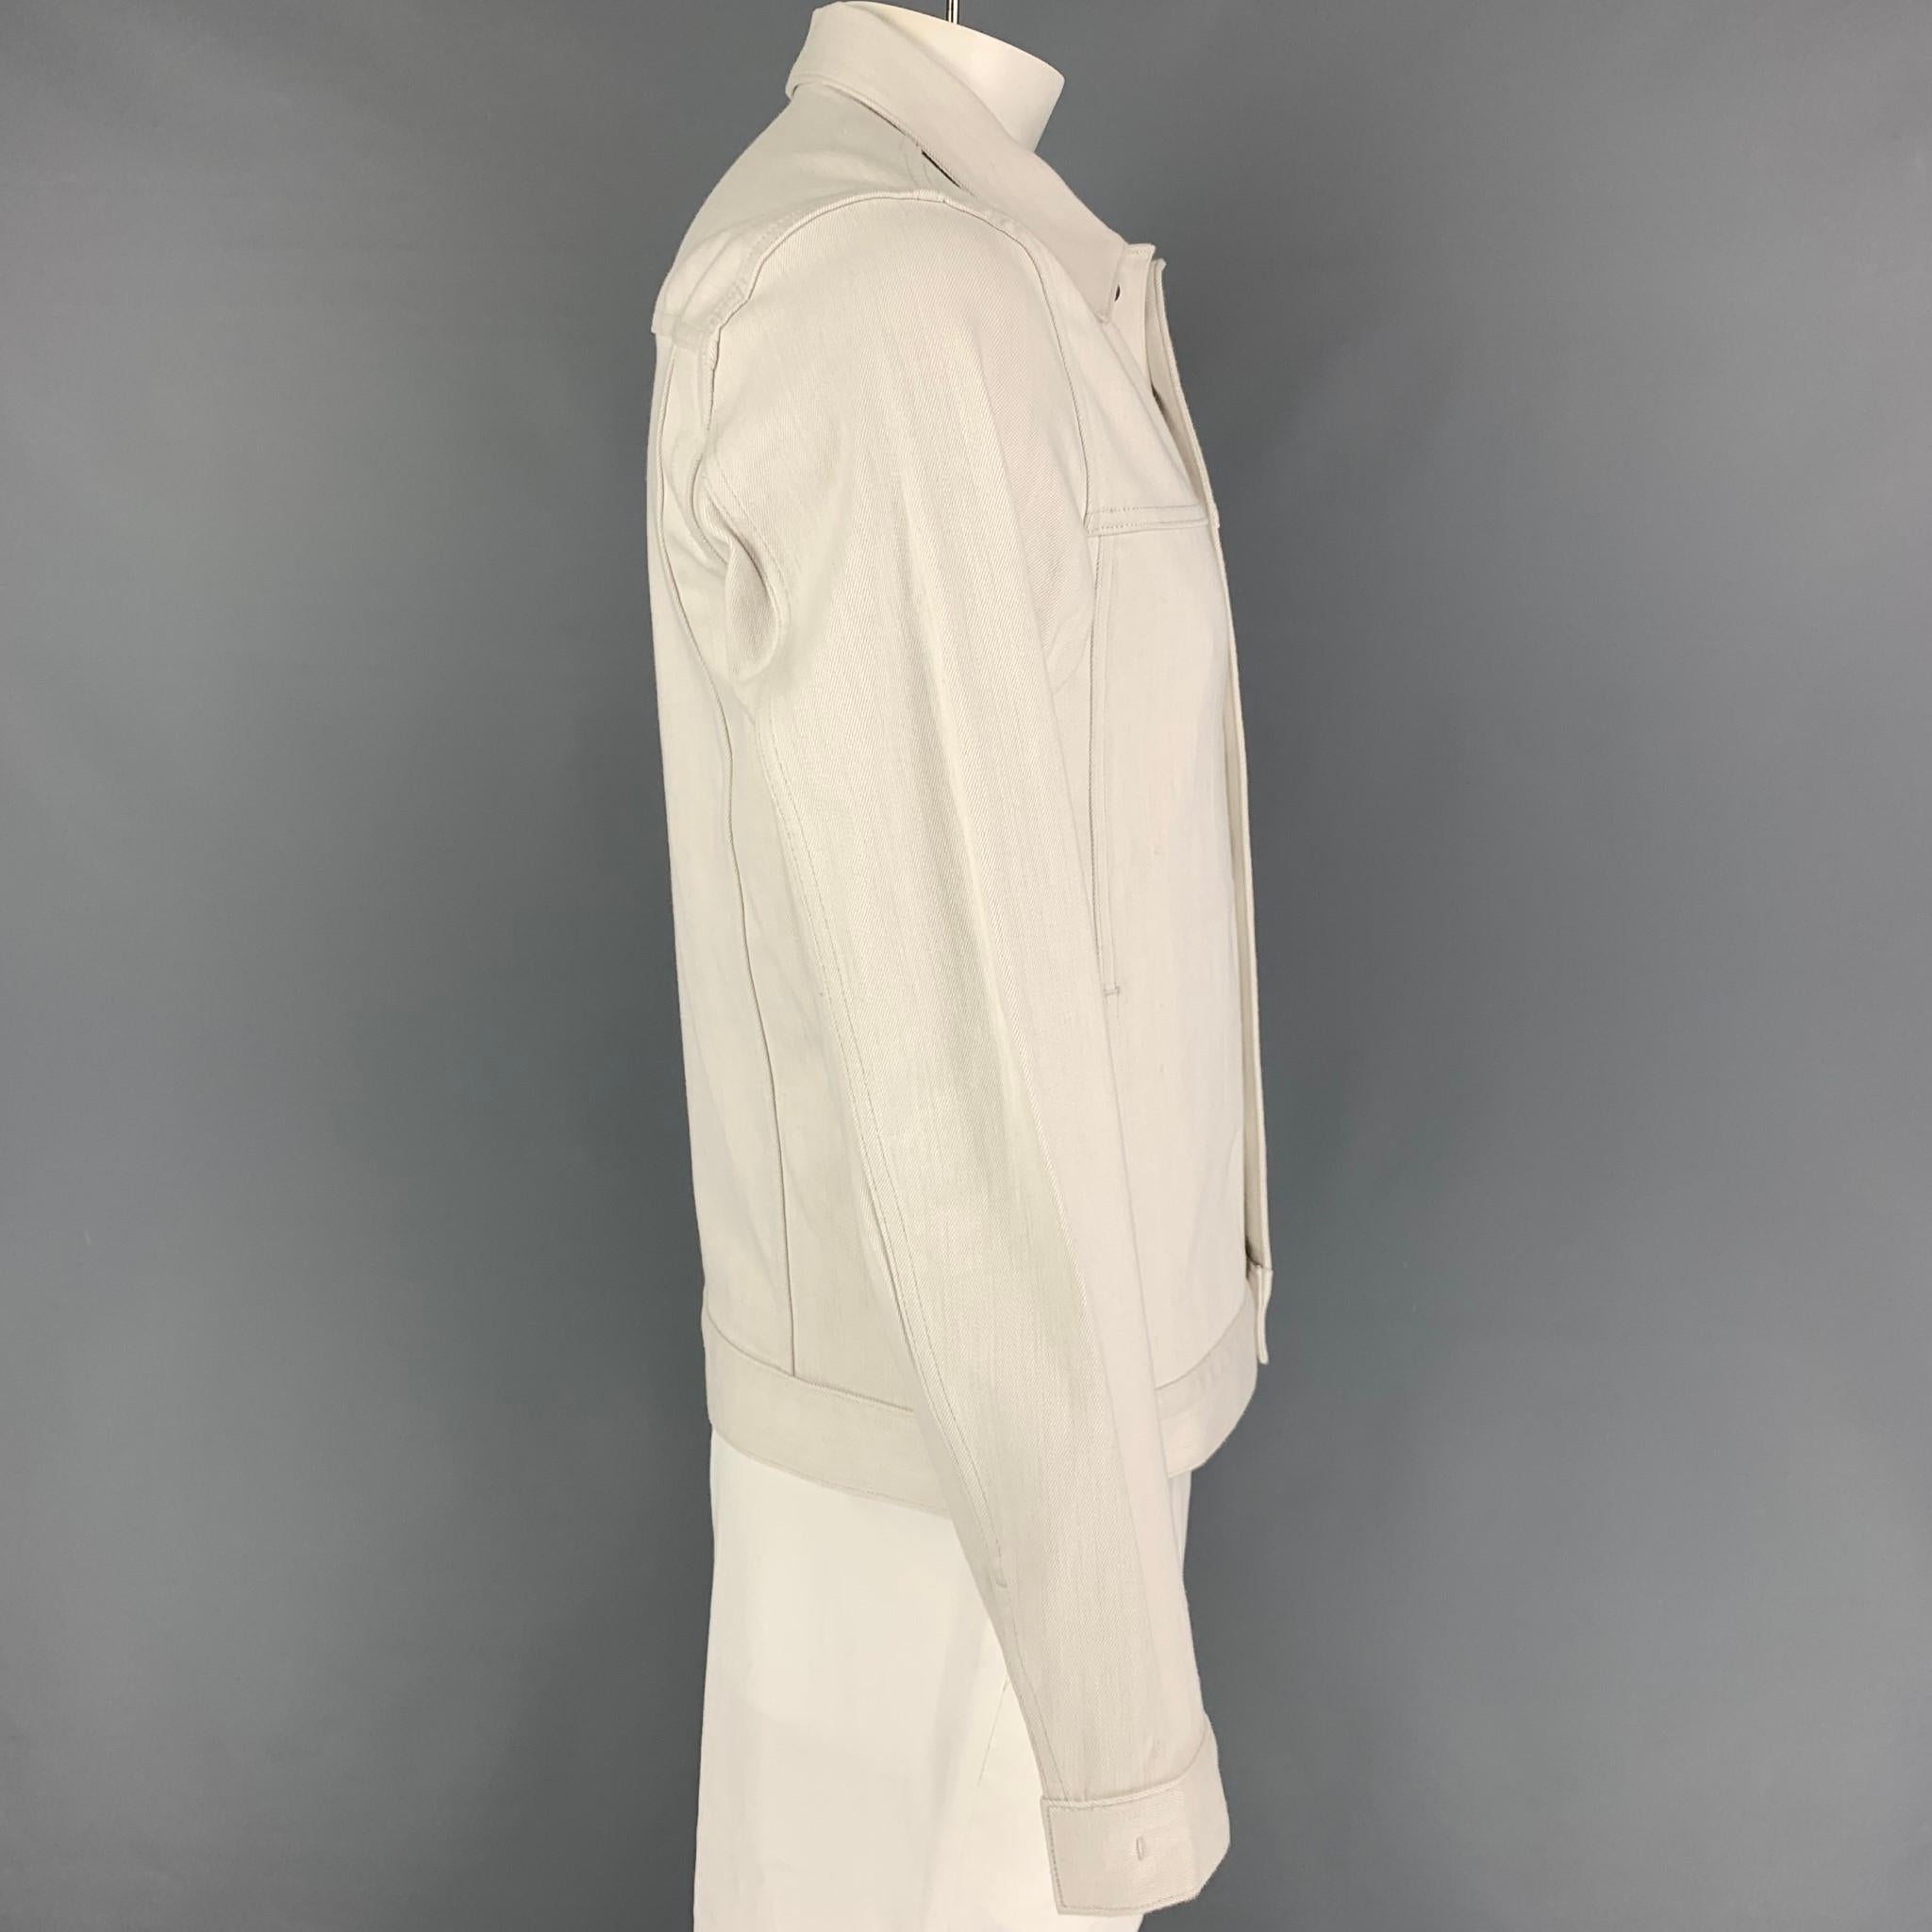 THEORY jacket comes in a off white cotton / polyurethane featuring a front pocket, spread collar, and a hidden snap button closure. 

Very Good Pre-Owned Condition.
Marked: L

Measurements:

Shoulder: 18.5 in.
Chest: 42 in.
Sleeve: 27 in.
Length: 26